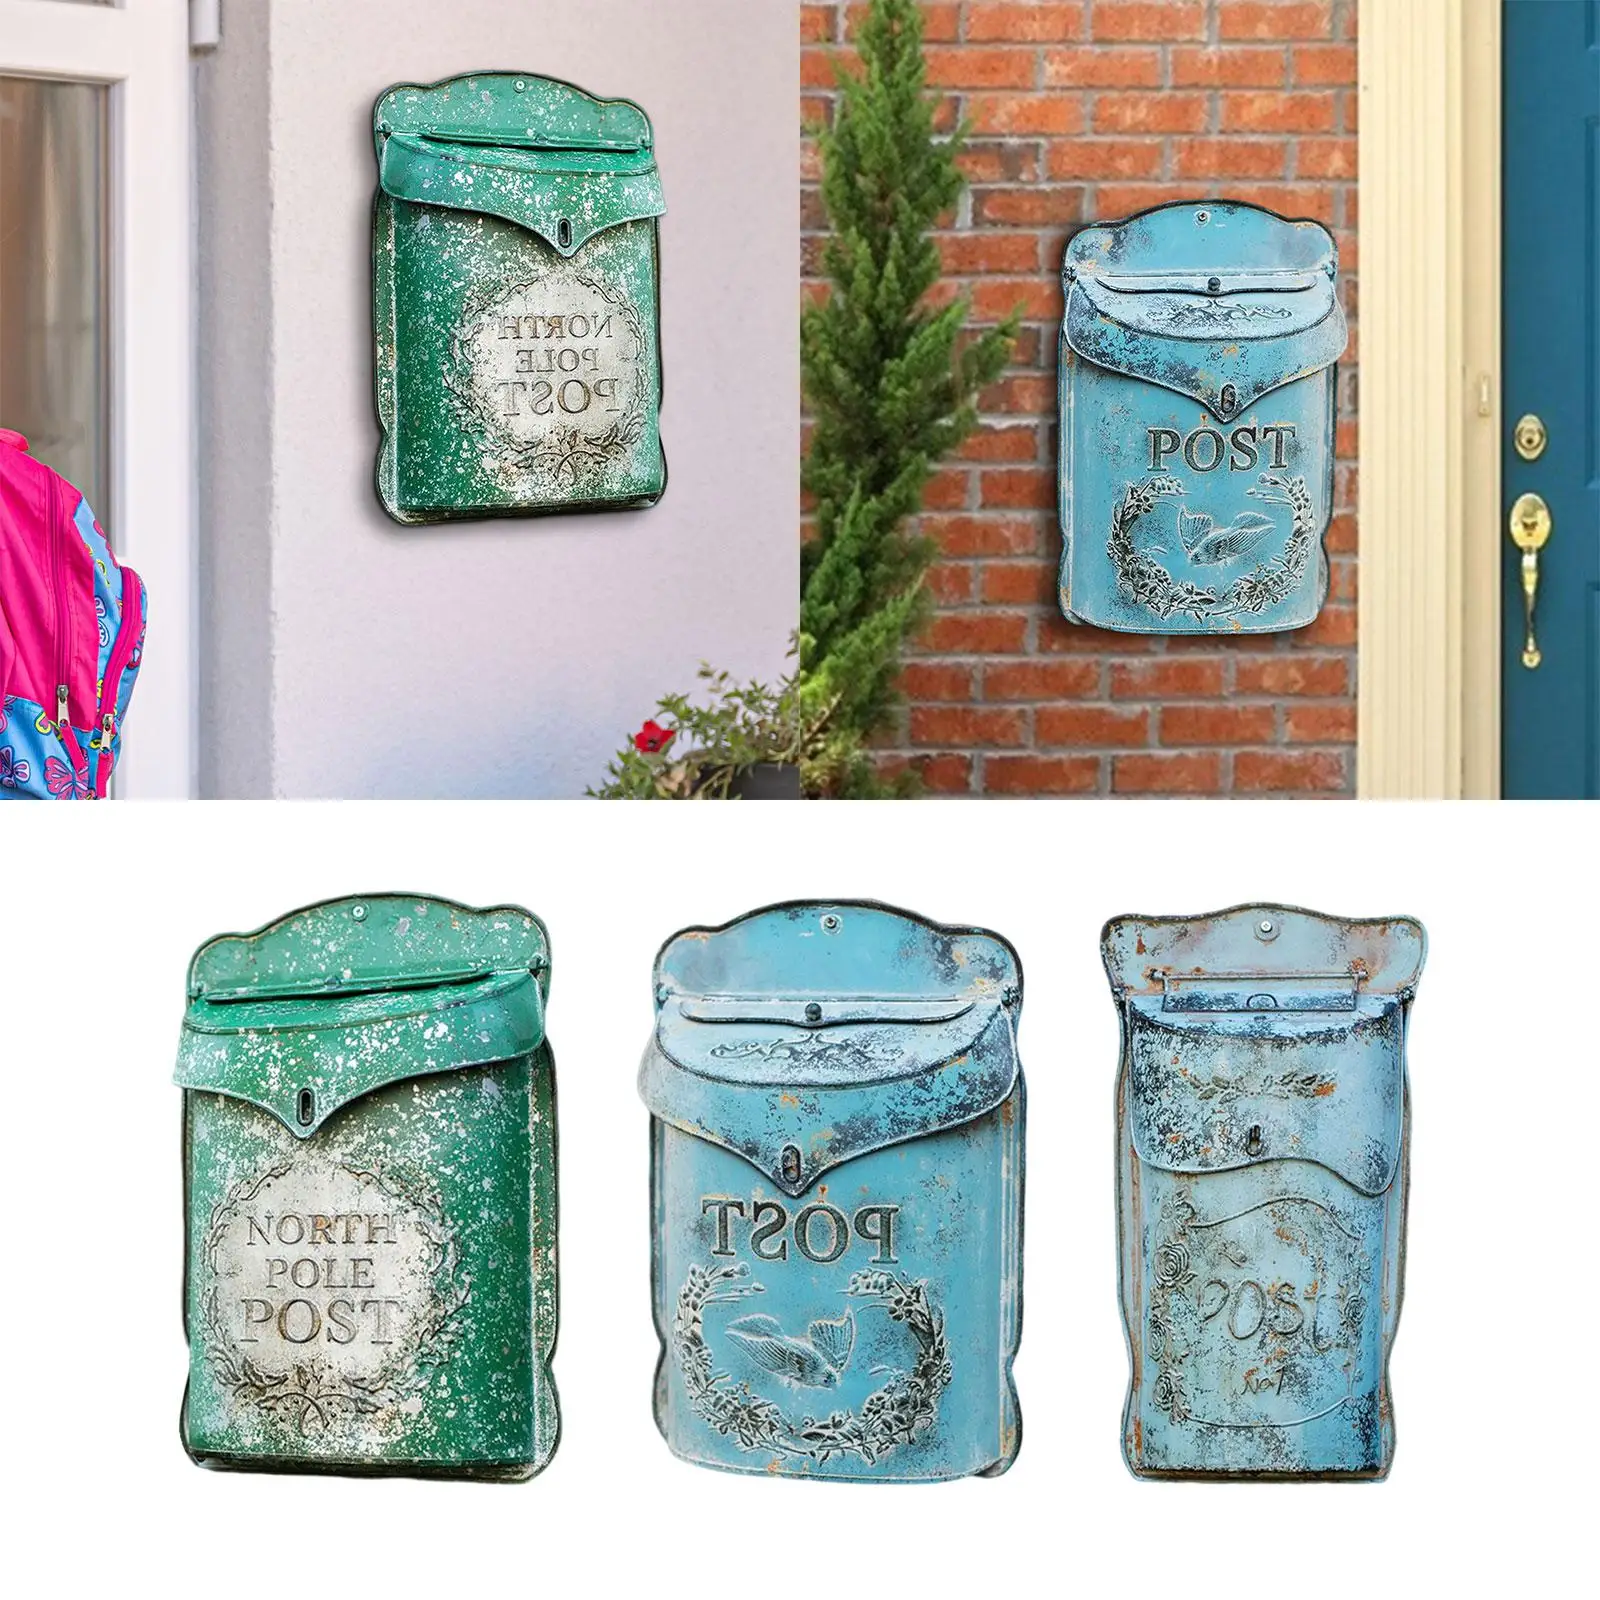 Mail Box Ornament Creative Art Supplies Hanging Collection for Home Porch Rural Envelopes